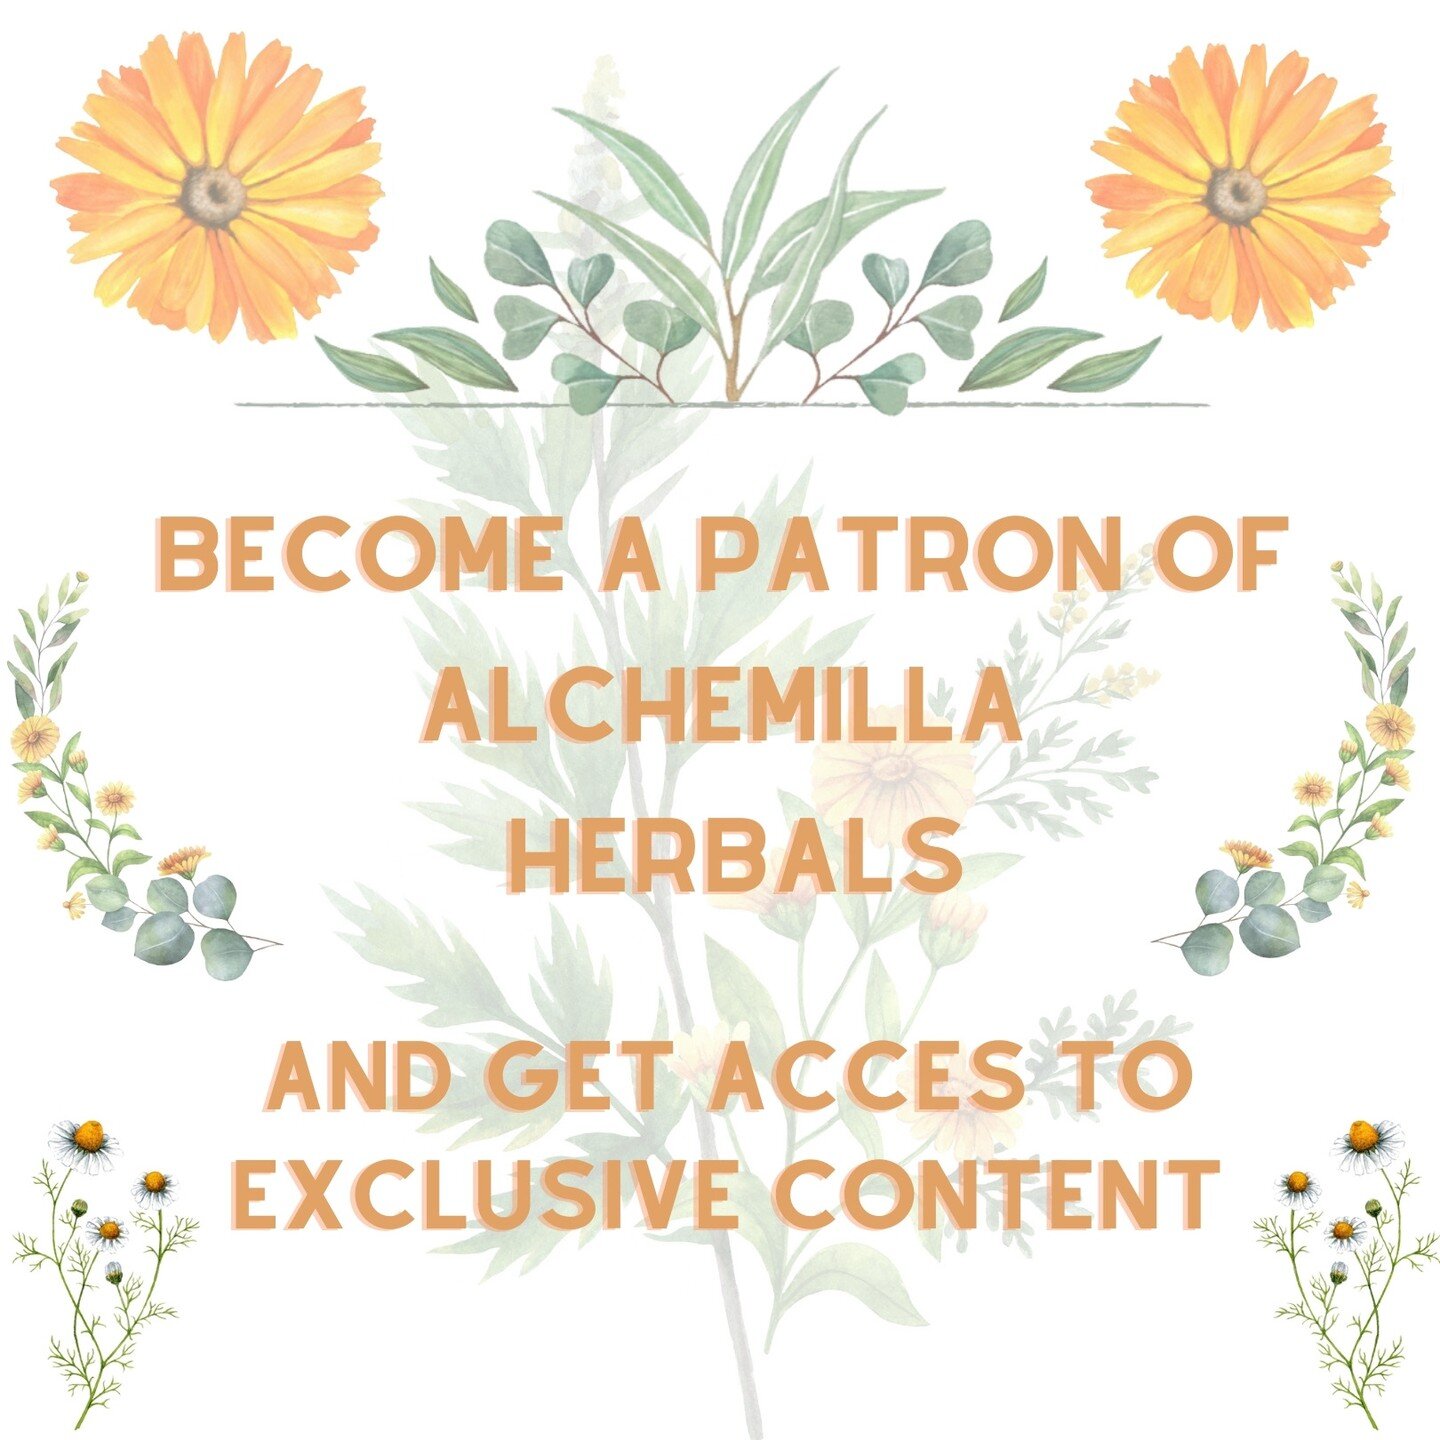 Get behind the scenes insight into the Alchemilla Herbals journey. Have VIP access to tutorials and videos that are not available anywhere else on the internet. 

Purchase a monthly membership tier depending on what you would like access to.

I have 